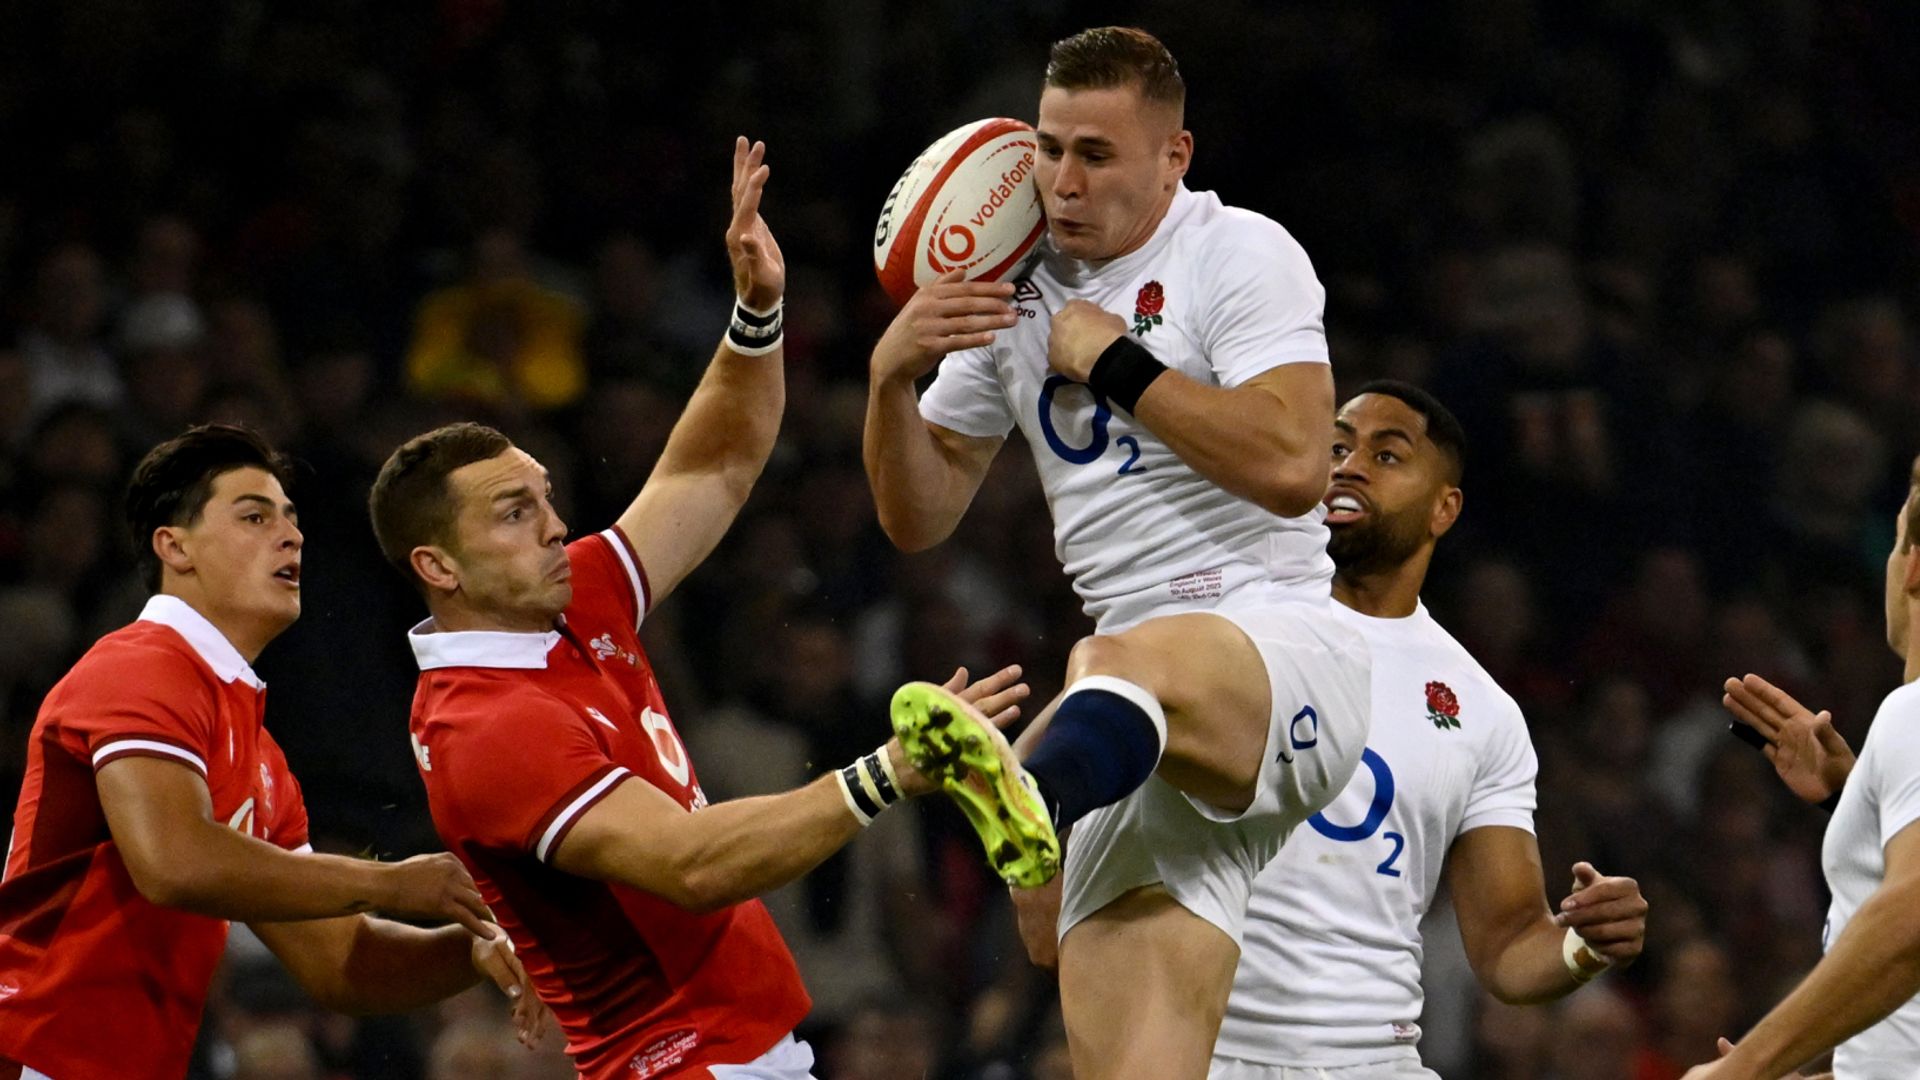 RWC 2023 warm-ups: England hold edge over Wales in close-fought opening LIVE!